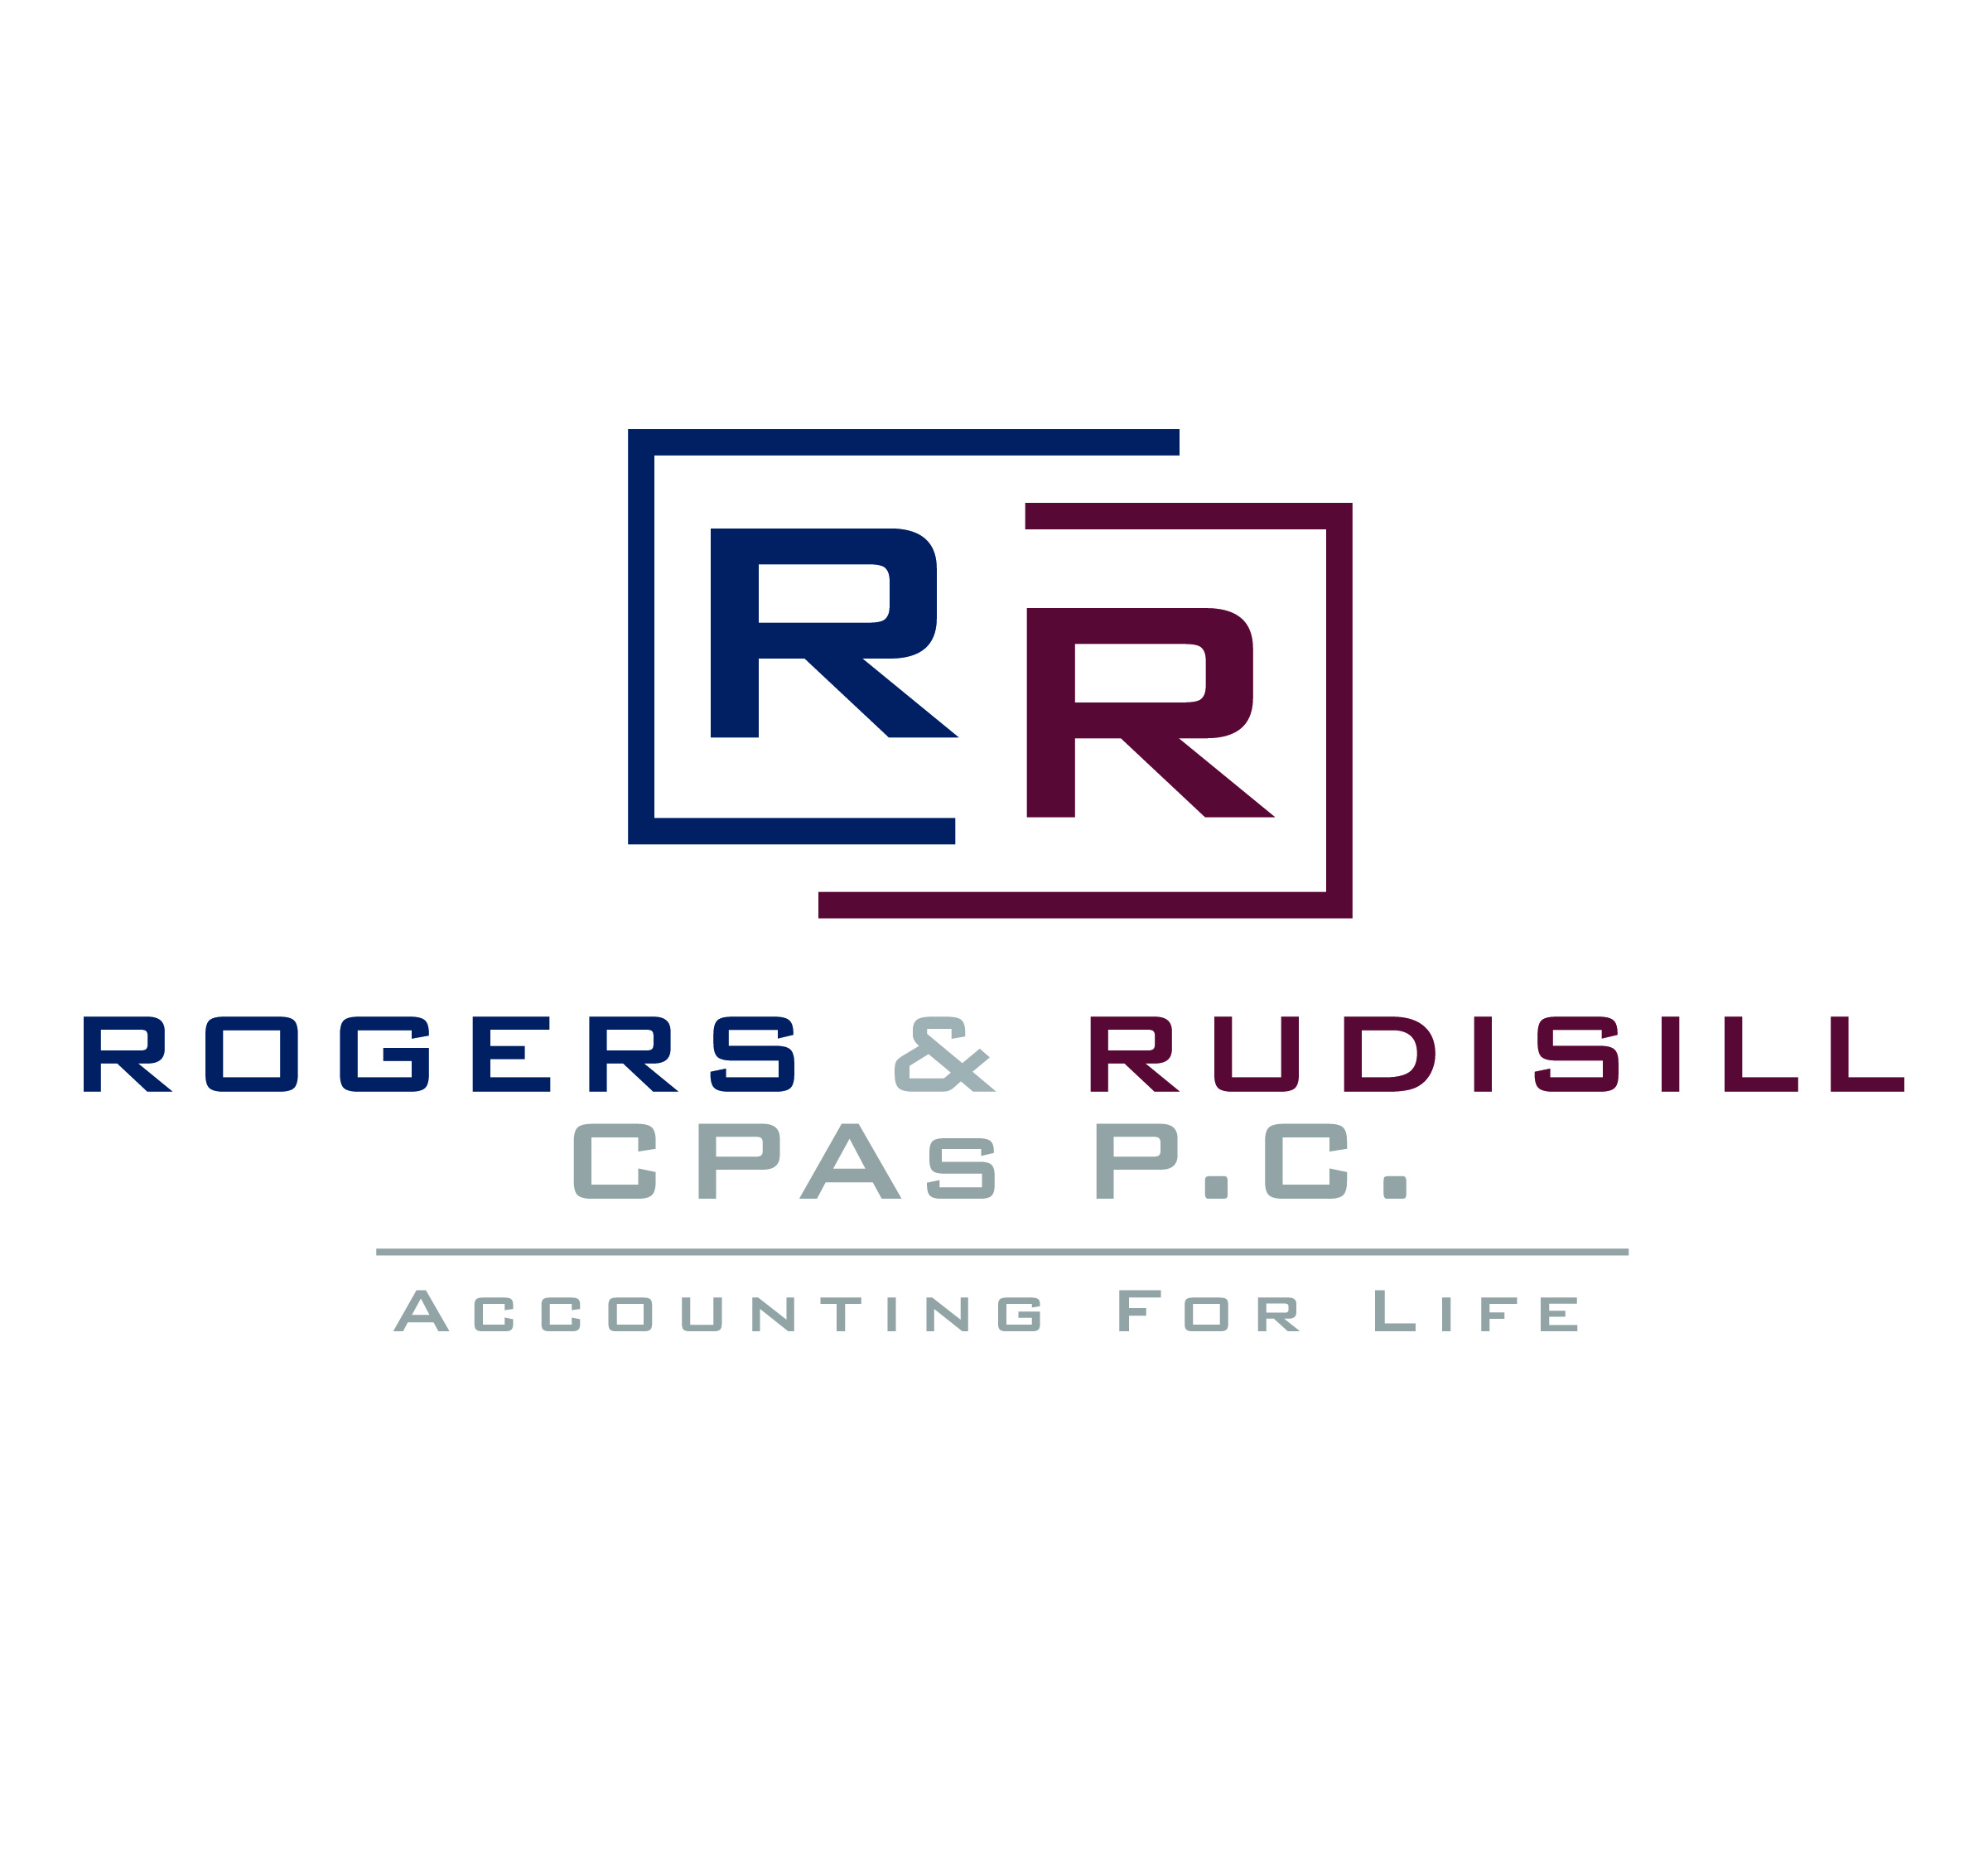 Rogers & Rudisill CPAs PC